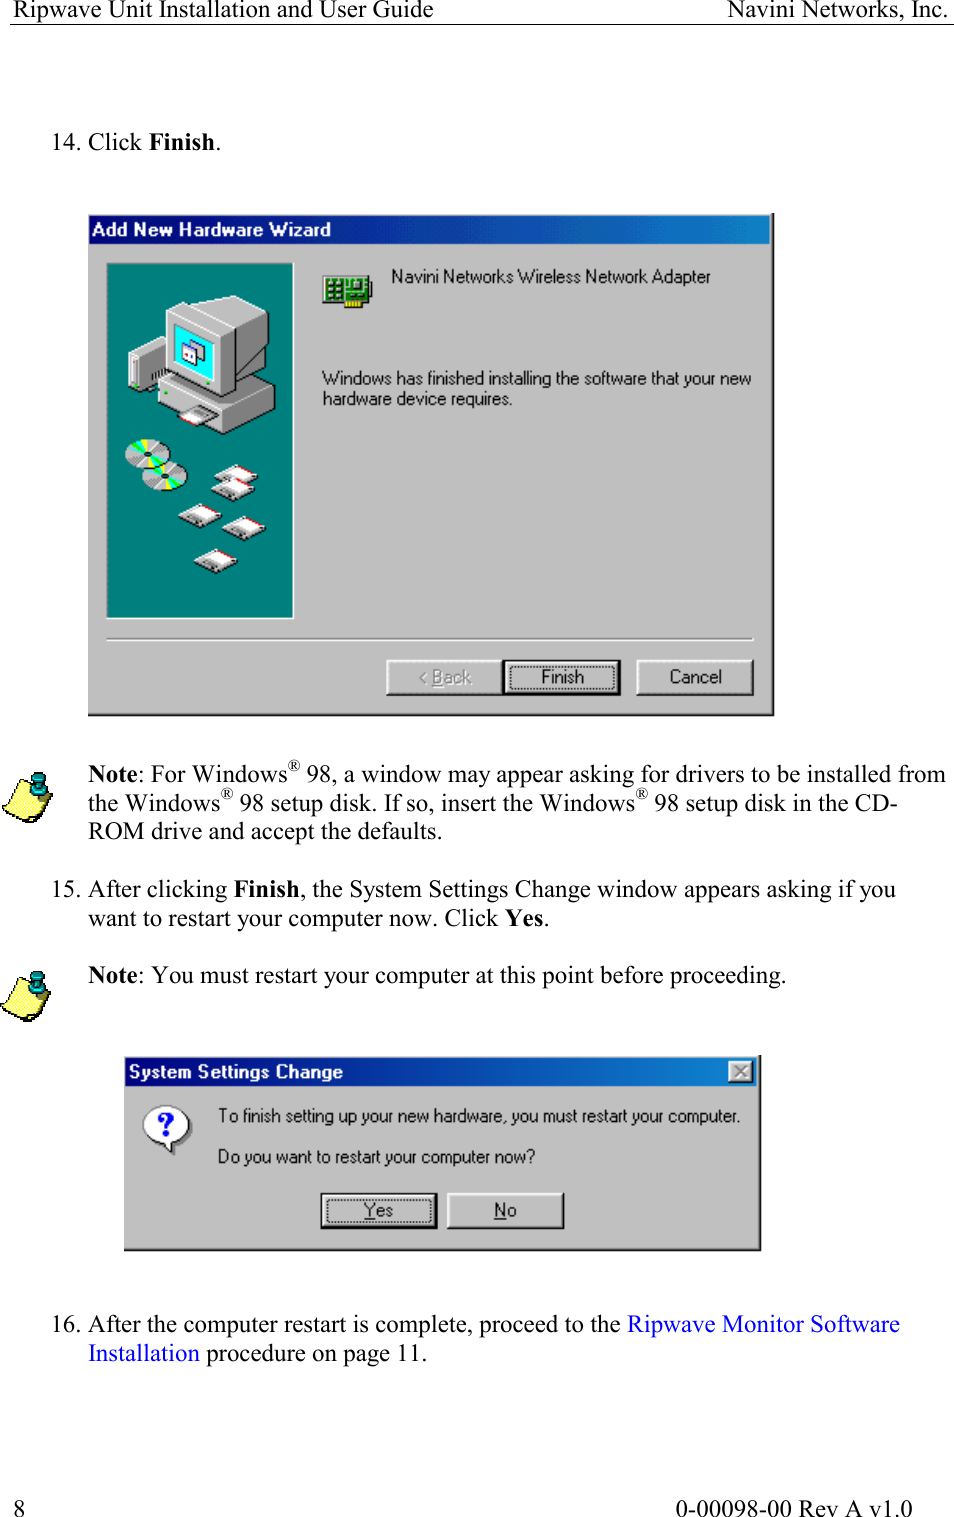 Ripwave Unit Installation and User Guide                                               Navini Networks, Inc.    14. Click Finish.                      Note: For Windows® 98, a window may appear asking for drivers to be installed from the Windows® 98 setup disk. If so, insert the Windows® 98 setup disk in the CD-ROM drive and accept the defaults.  15. After clicking Finish, the System Settings Change window appears asking if you want to restart your computer now. Click Yes.  Note: You must restart your computer at this point before proceeding.      16. After the computer restart is complete, proceed to the Ripwave Monitor Software Installation procedure on page 11.                                                                                                        0-00098-00 Rev A v1.0 8